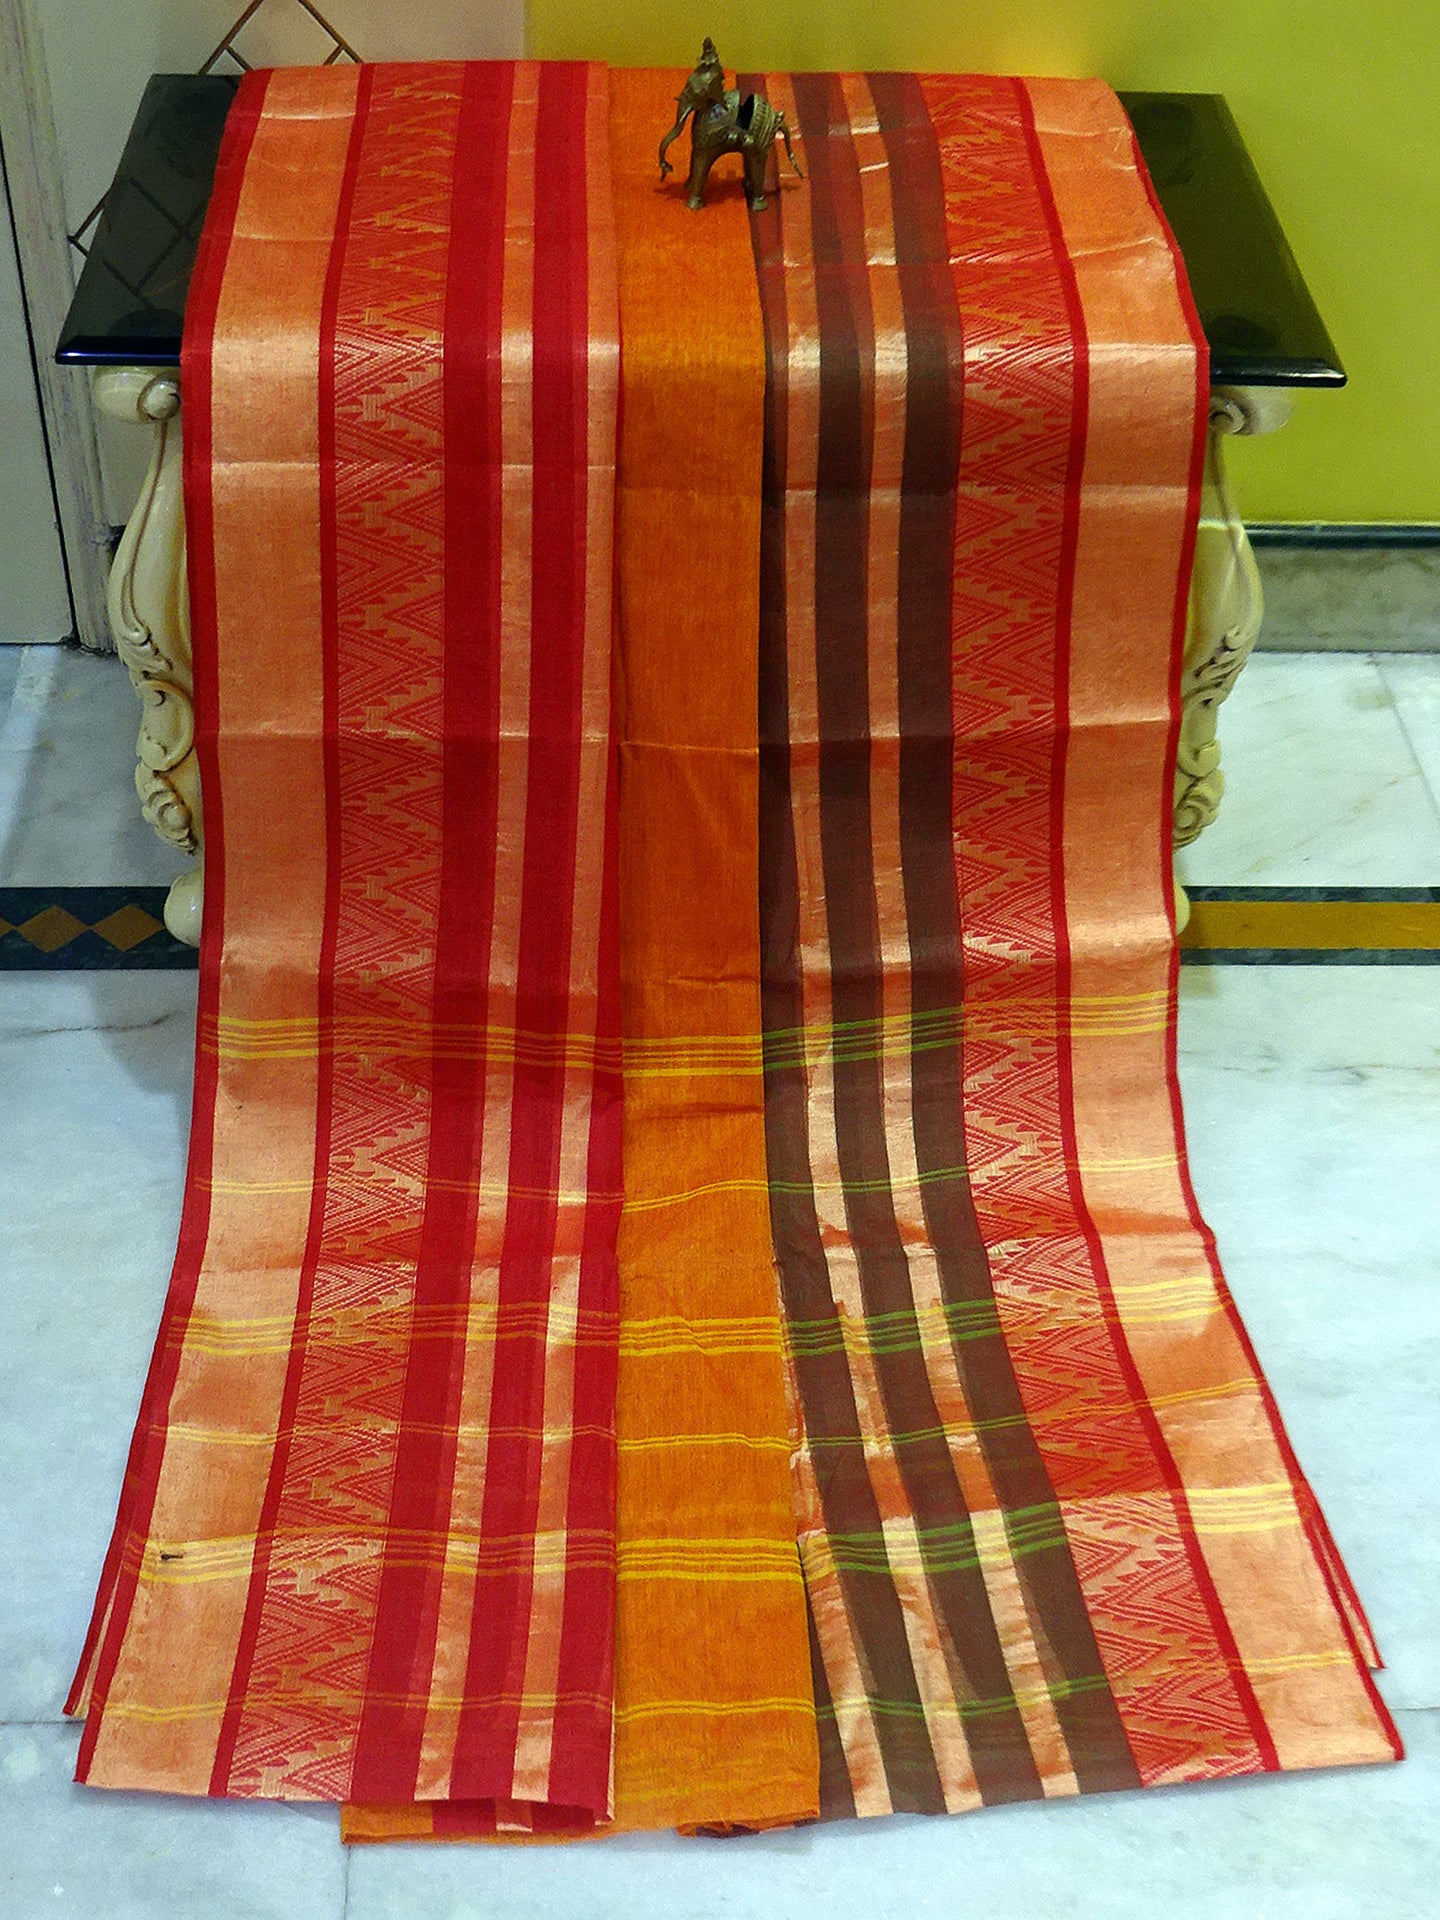 Temple Border Tangail Cotton Saree in Sunset Yellow, Red and Green with Beige Stripes